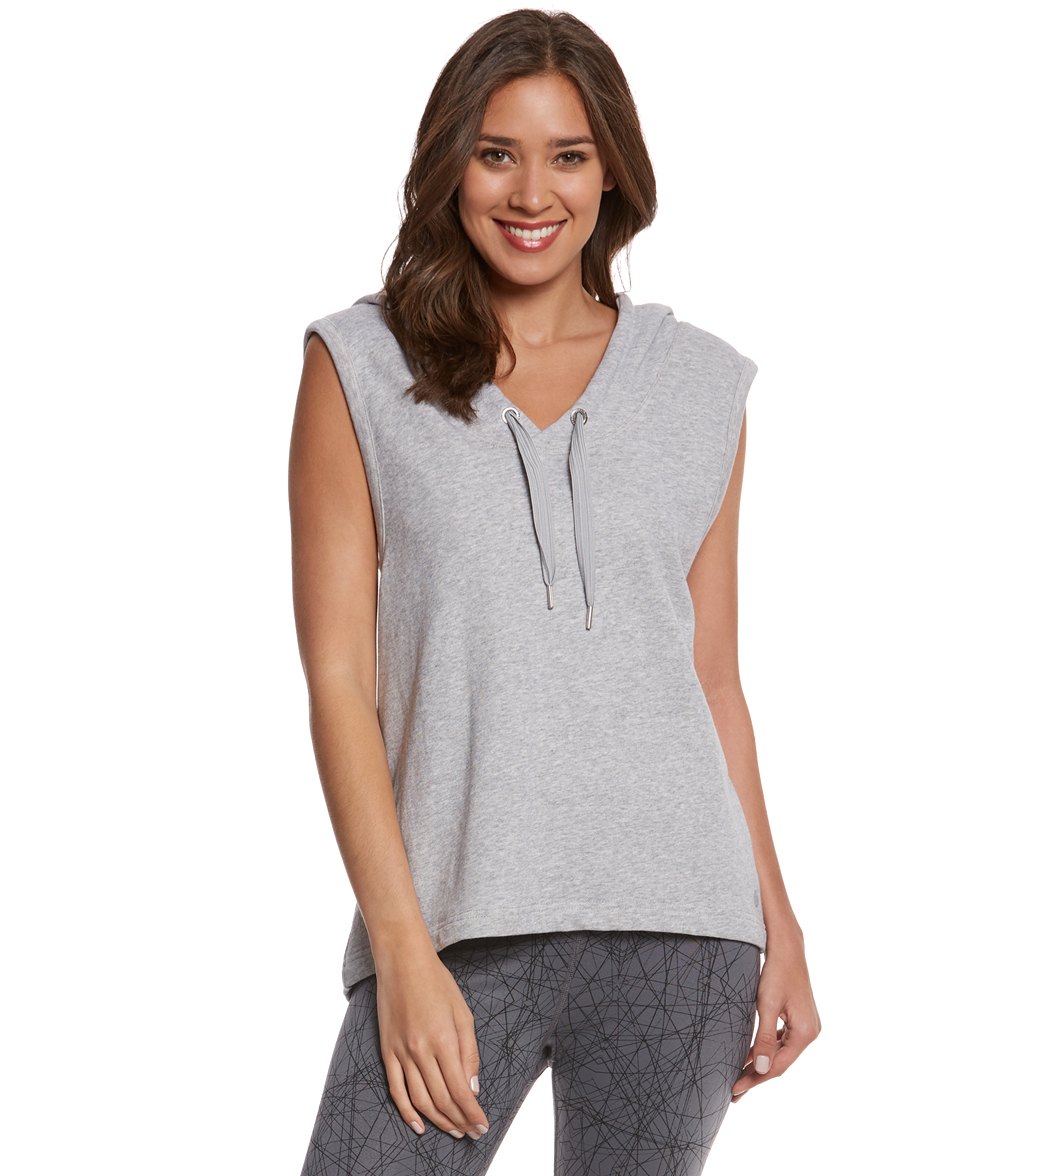 Seafolly Women's Ocean Rose Cross Back Hoodie Top - Grey Marle Large Cotton - Swimoutlet.com